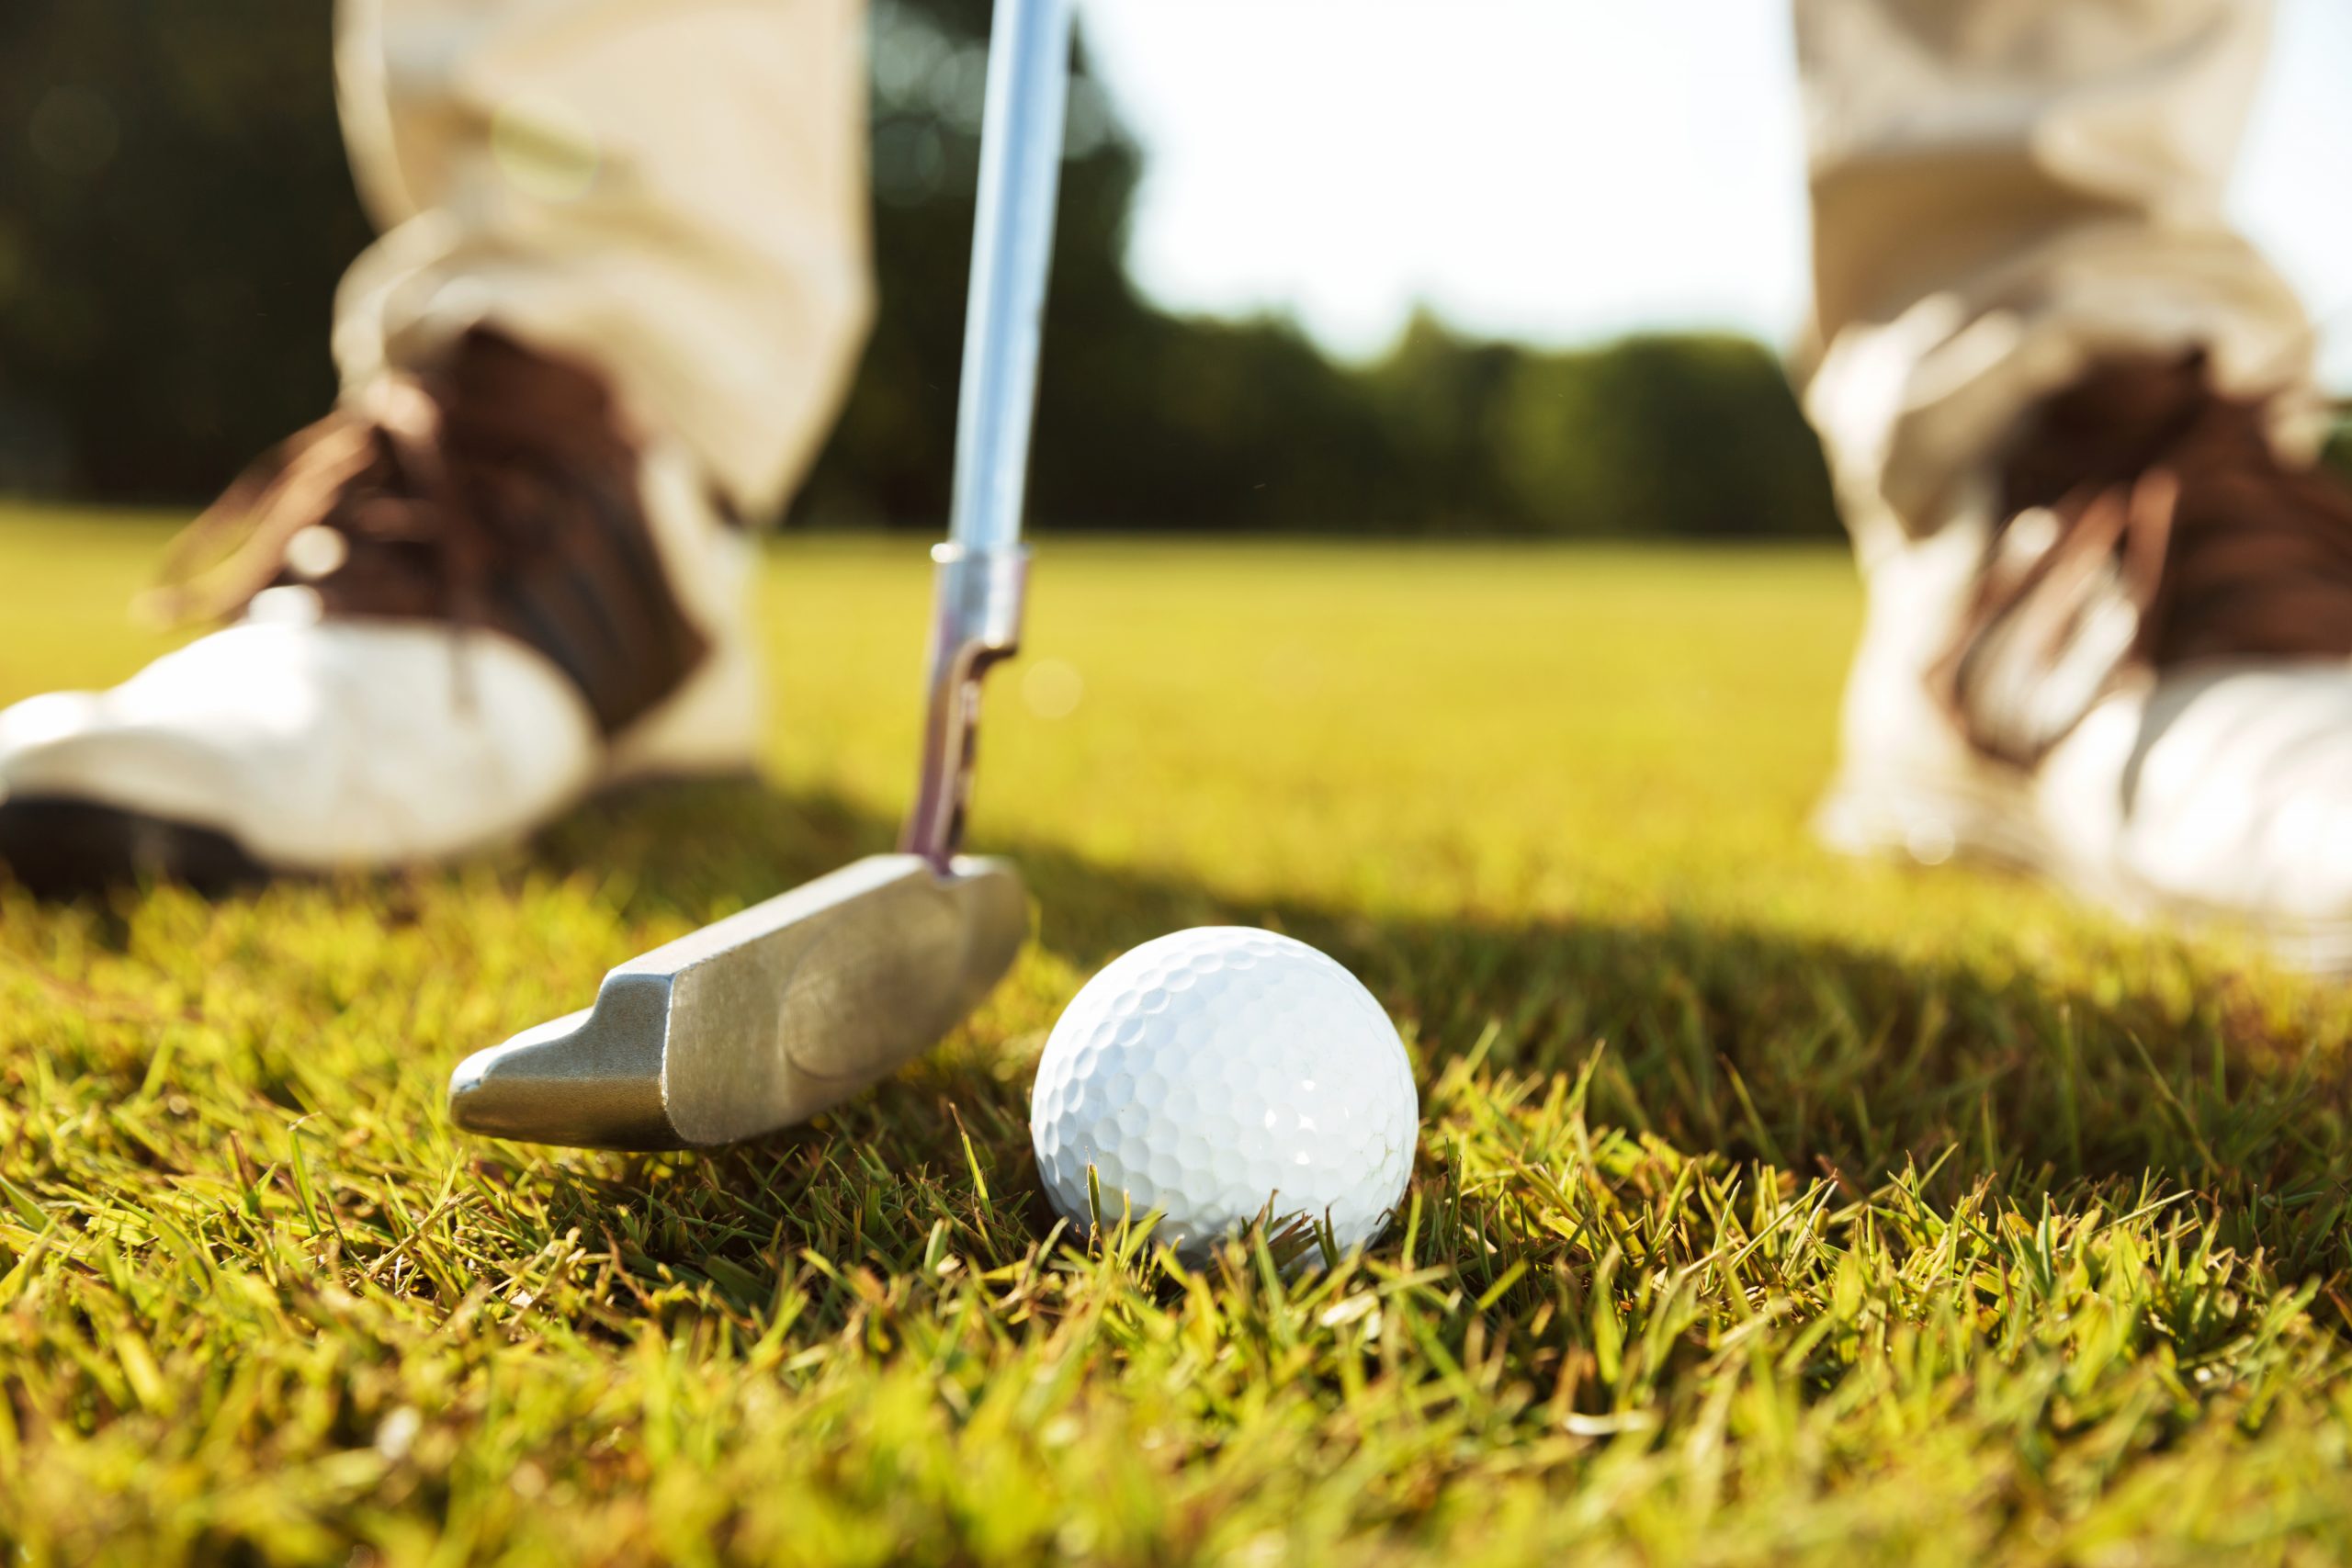 Learning to play golf: how to perfect putting?